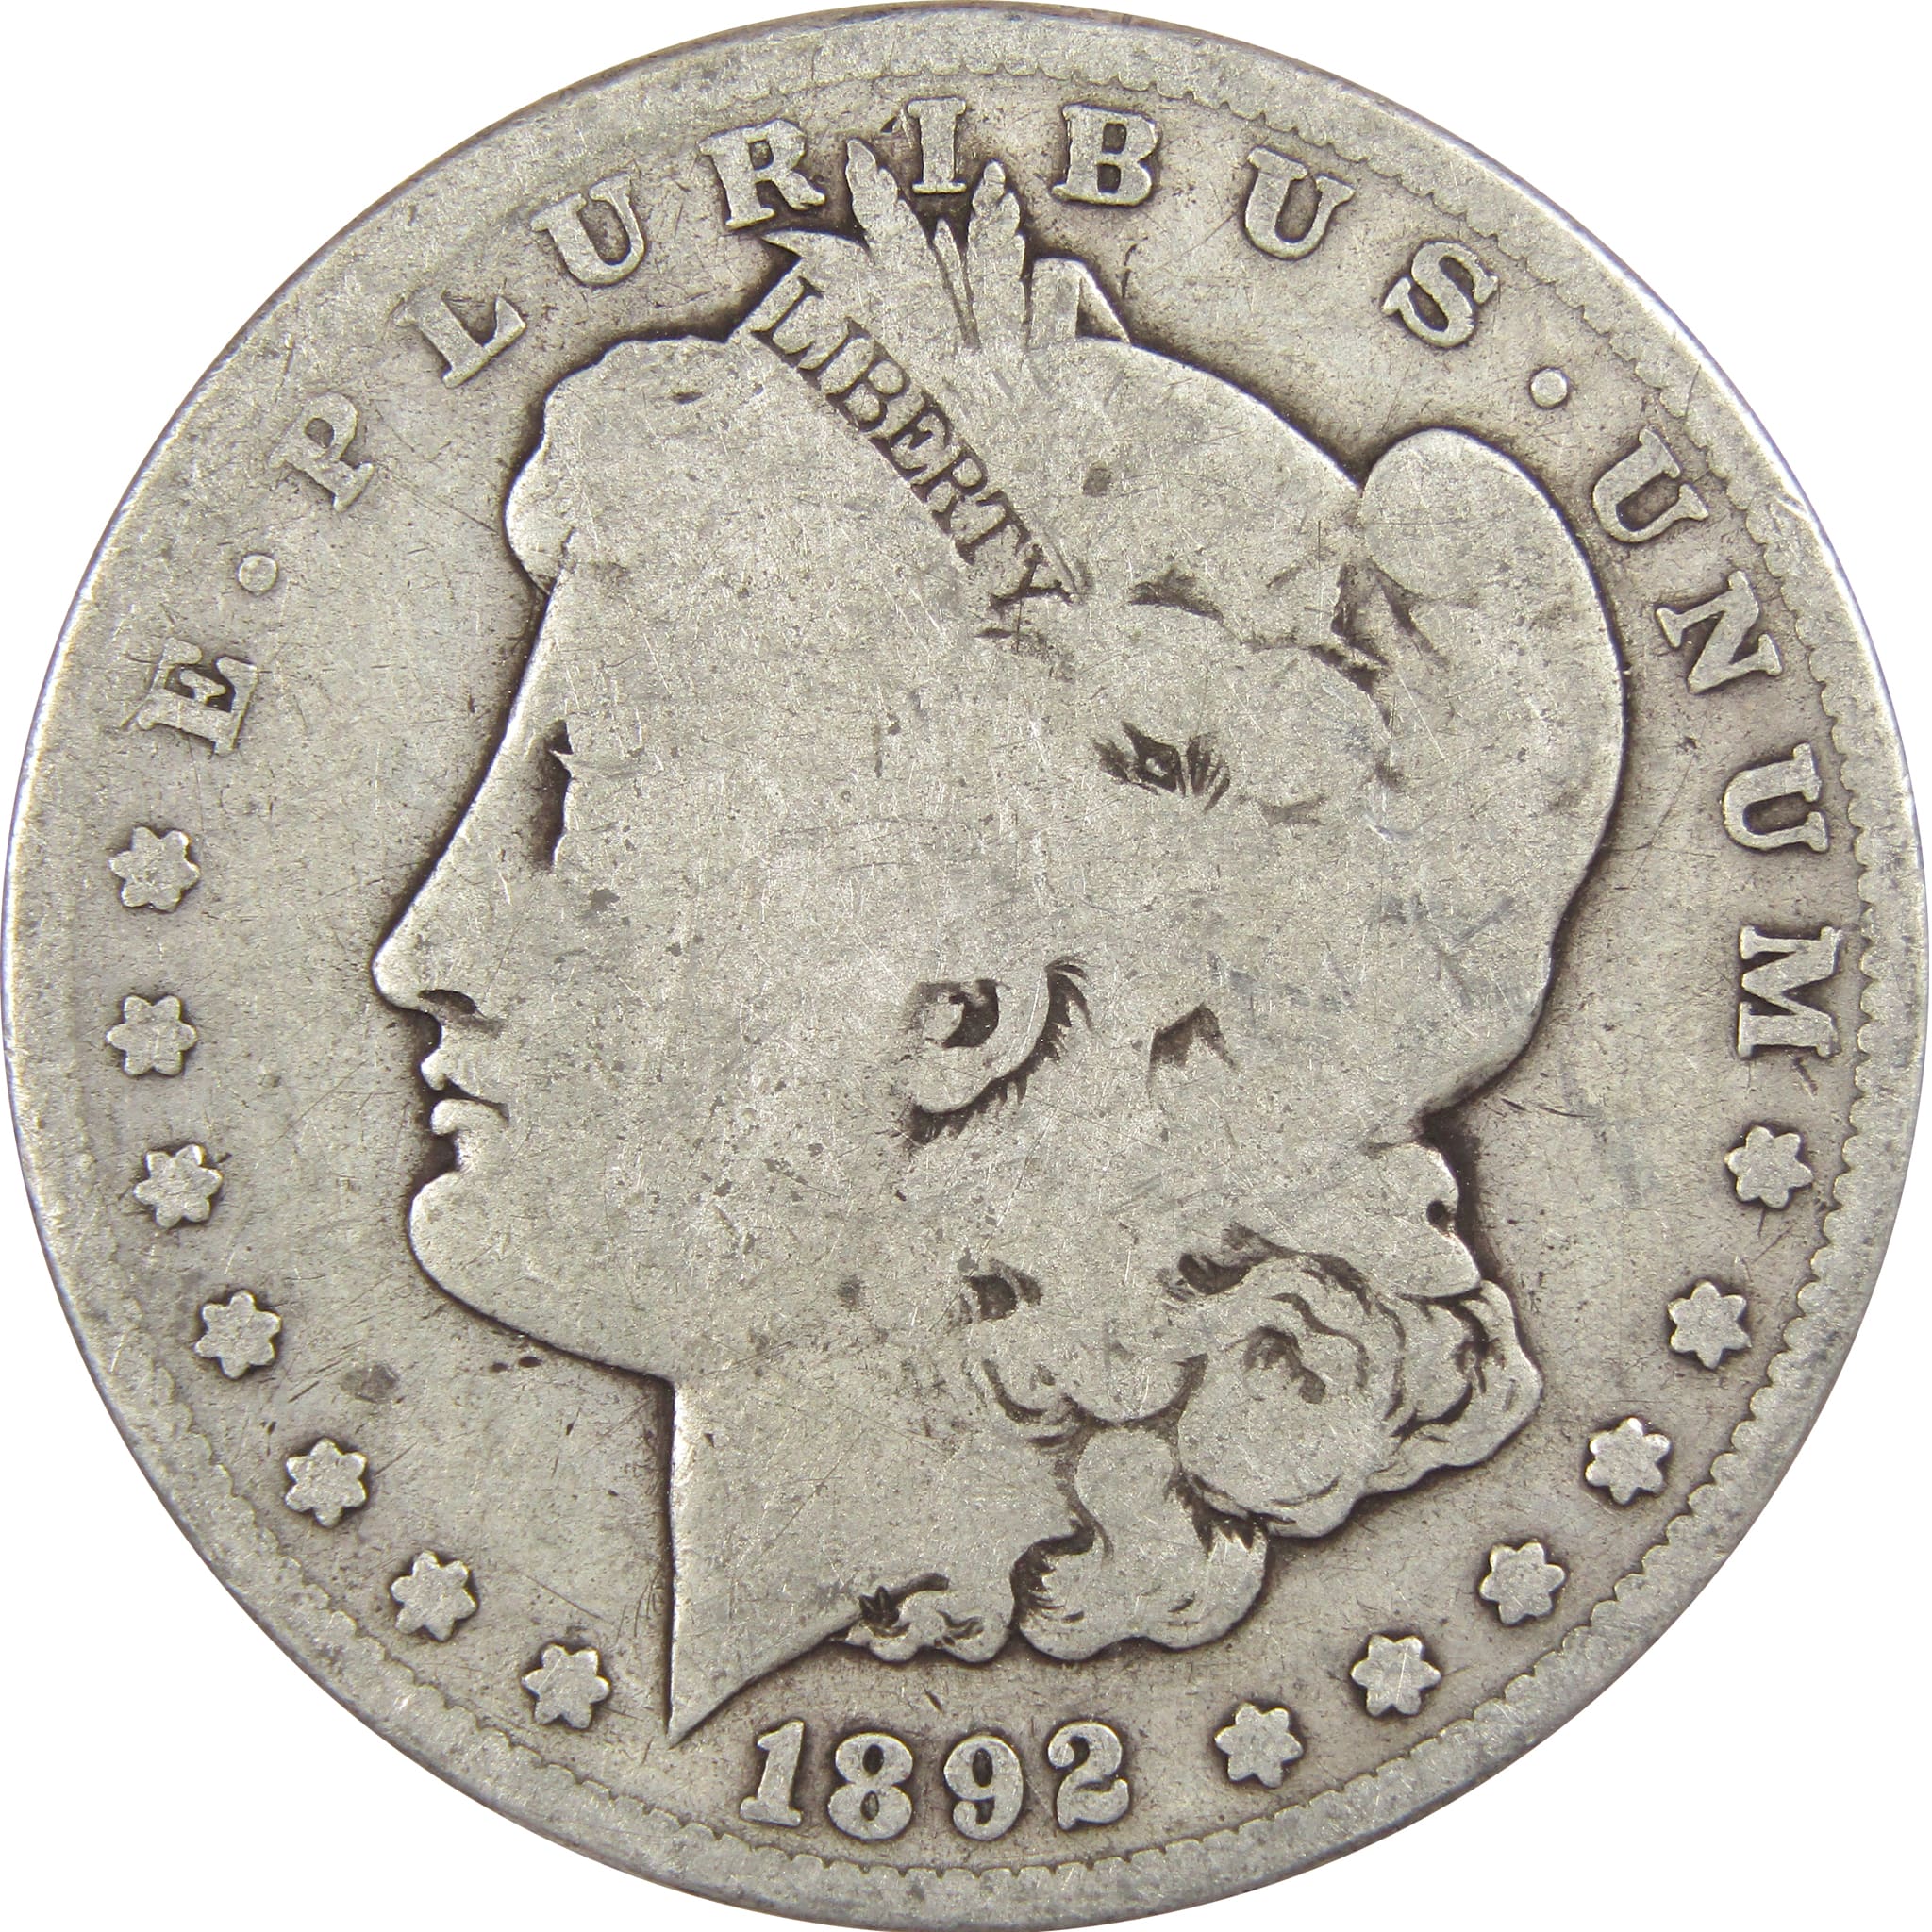 1892 S Morgan Dollar AG About Good 90% Silver US Coin SKU:IPC7444 - Morgan coin - Morgan silver dollar - Morgan silver dollar for sale - Profile Coins &amp; Collectibles